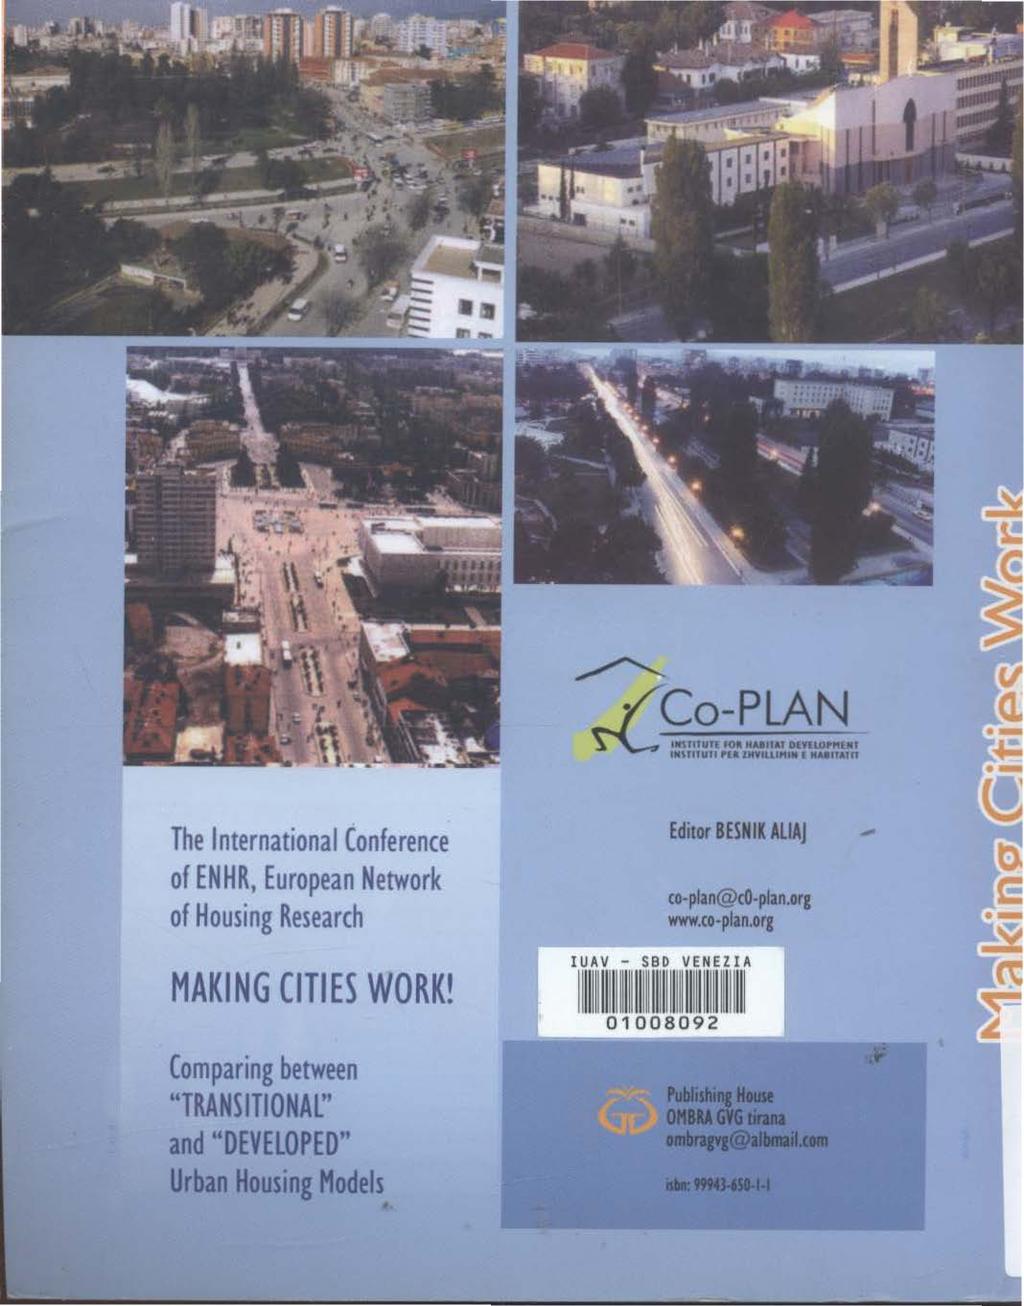 ~ Co-PLAN v (L 111nnun - NMnar -1.0PM111r 111nn11n PH 1imu.1-1 11Mnarn The International Conference of ENHR, European Network of Housing Research MAKING CITIES WORK!